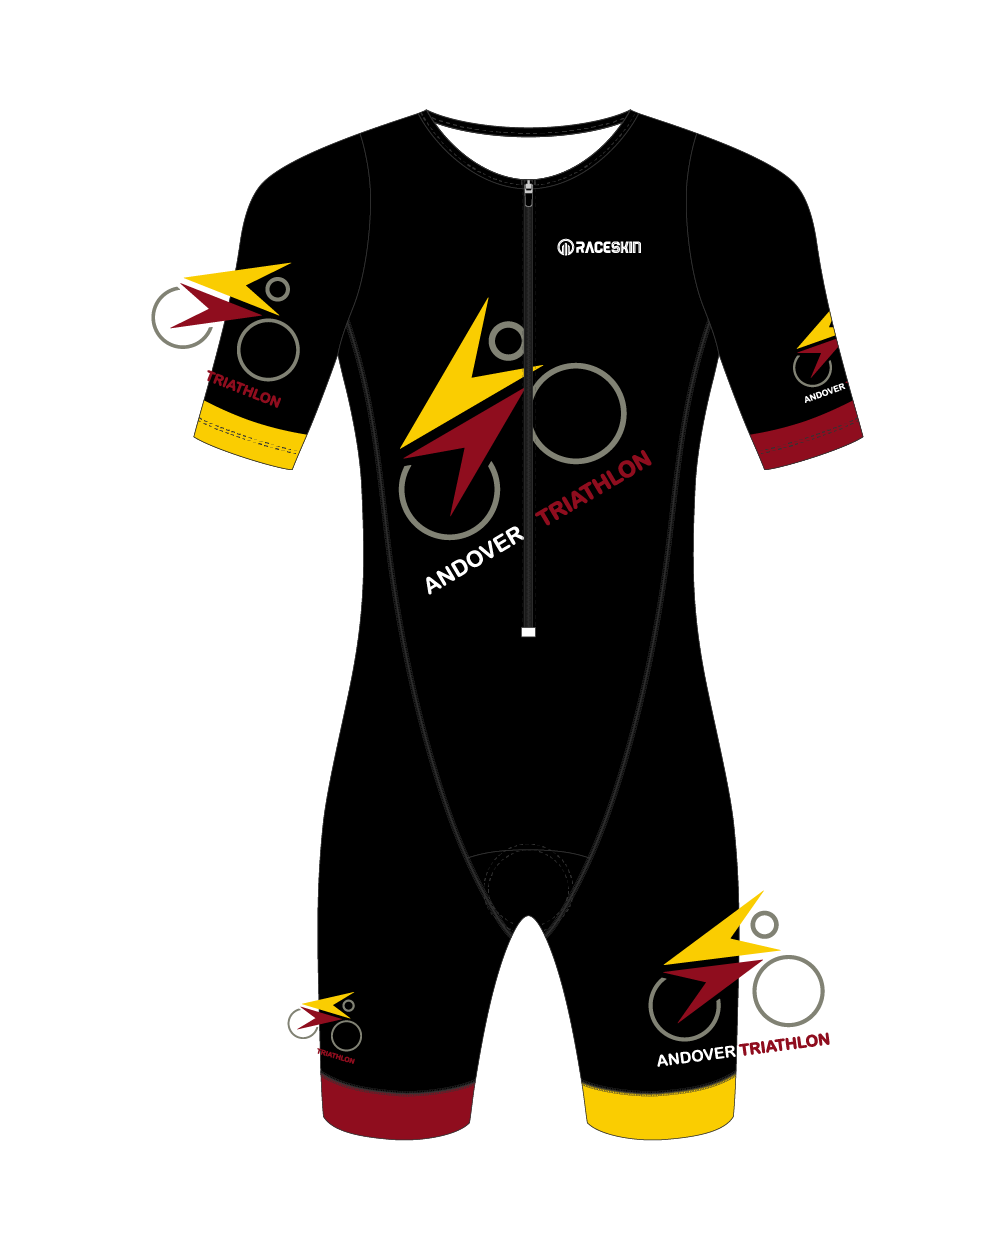 andover-club-sleeved-tri-suit